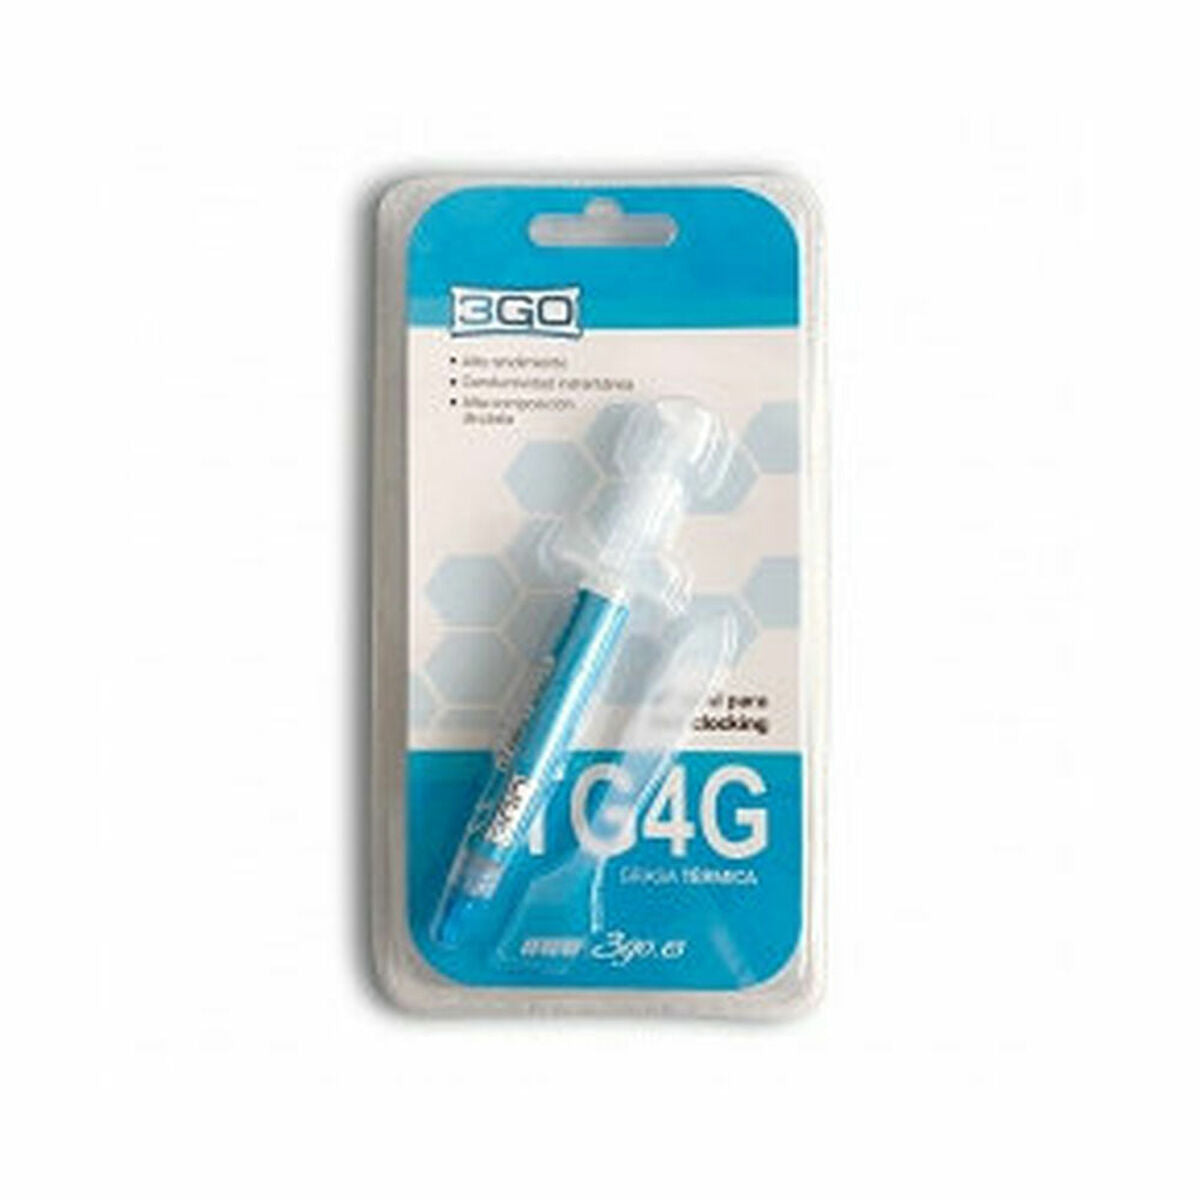 Thermal Paste 3GO TG4G Black, 3GO, Computing, Accessories, thermal-paste-3go-tg4g-black, Brand_3GO, category-reference-2609, category-reference-2642, category-reference-2656, category-reference-t-19685, category-reference-t-19908, category-reference-t-21353, category-reference-t-25623, category-reference-t-29801, computers / peripherals, Condition_NEW, office, Price_20 - 50, Teleworking, RiotNook